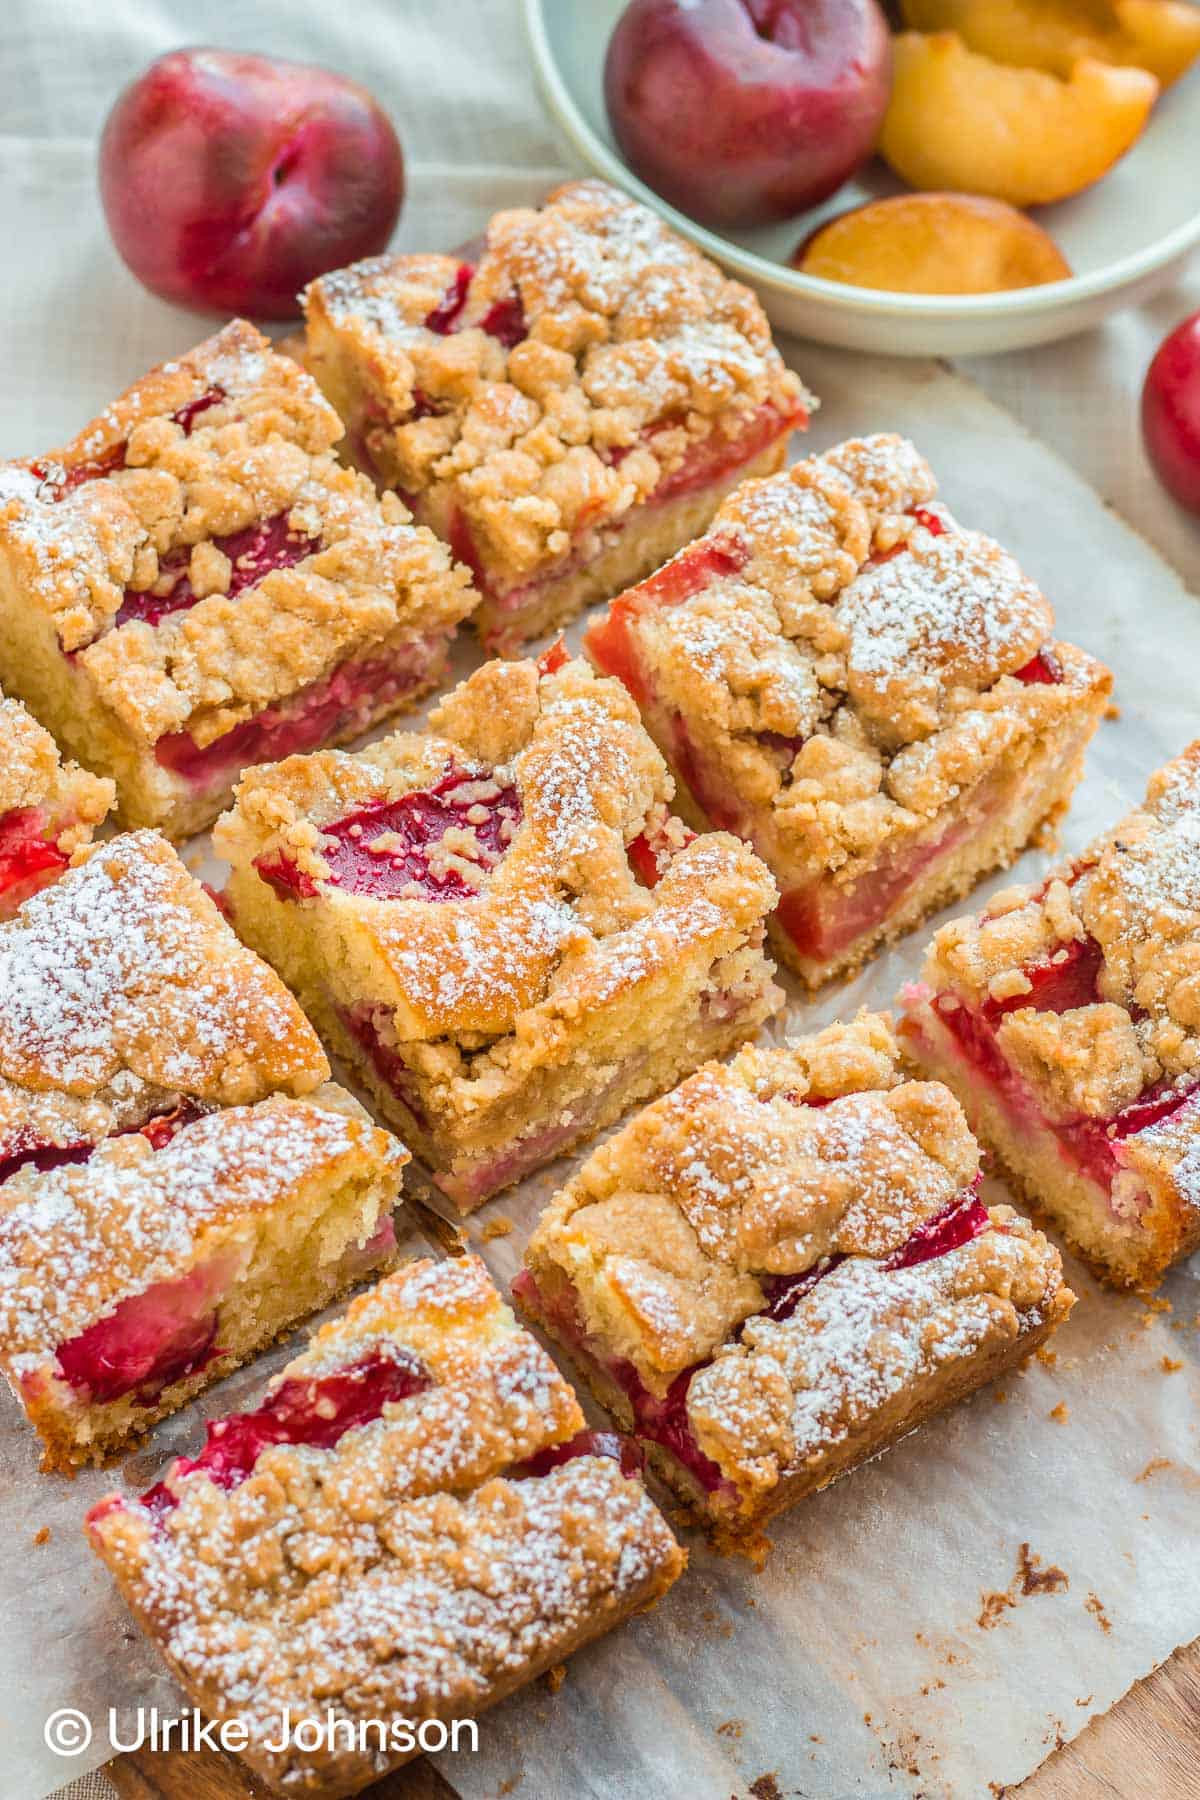 German Plum Crumble Cake without yeast served sliced on a wooden board